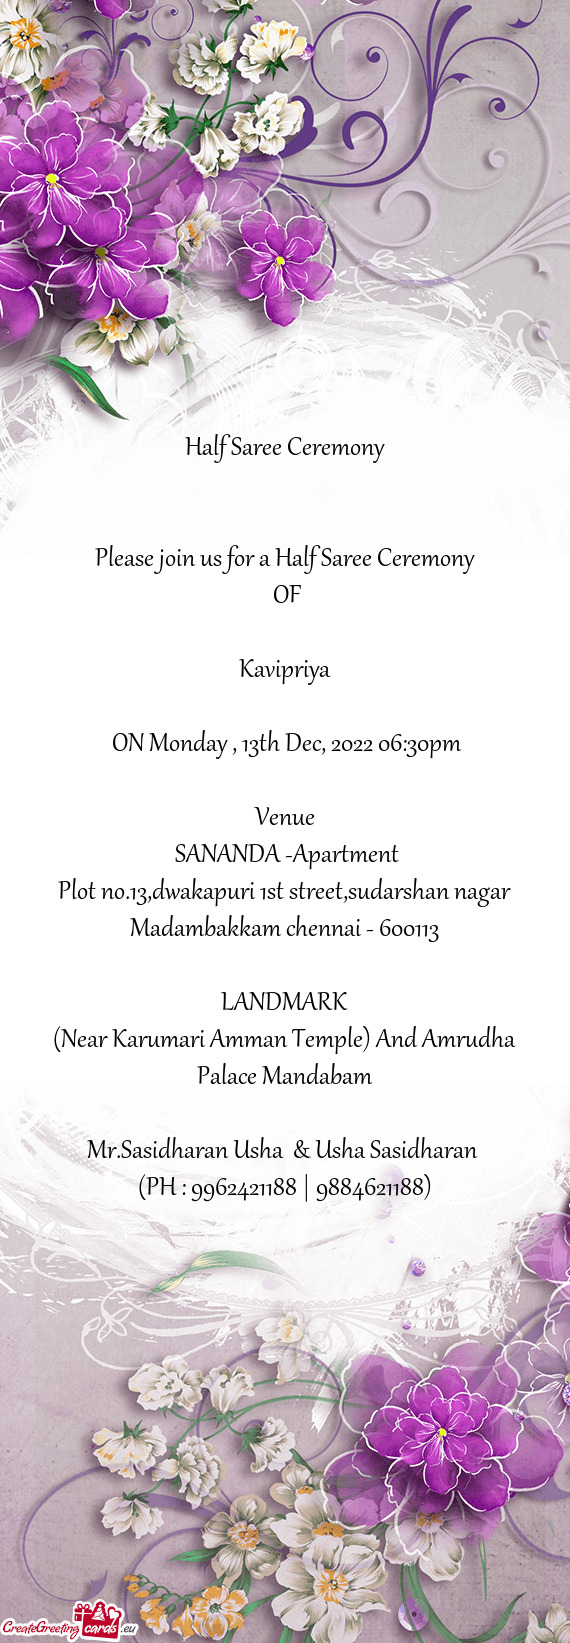 Please join us for a Half Saree Ceremony